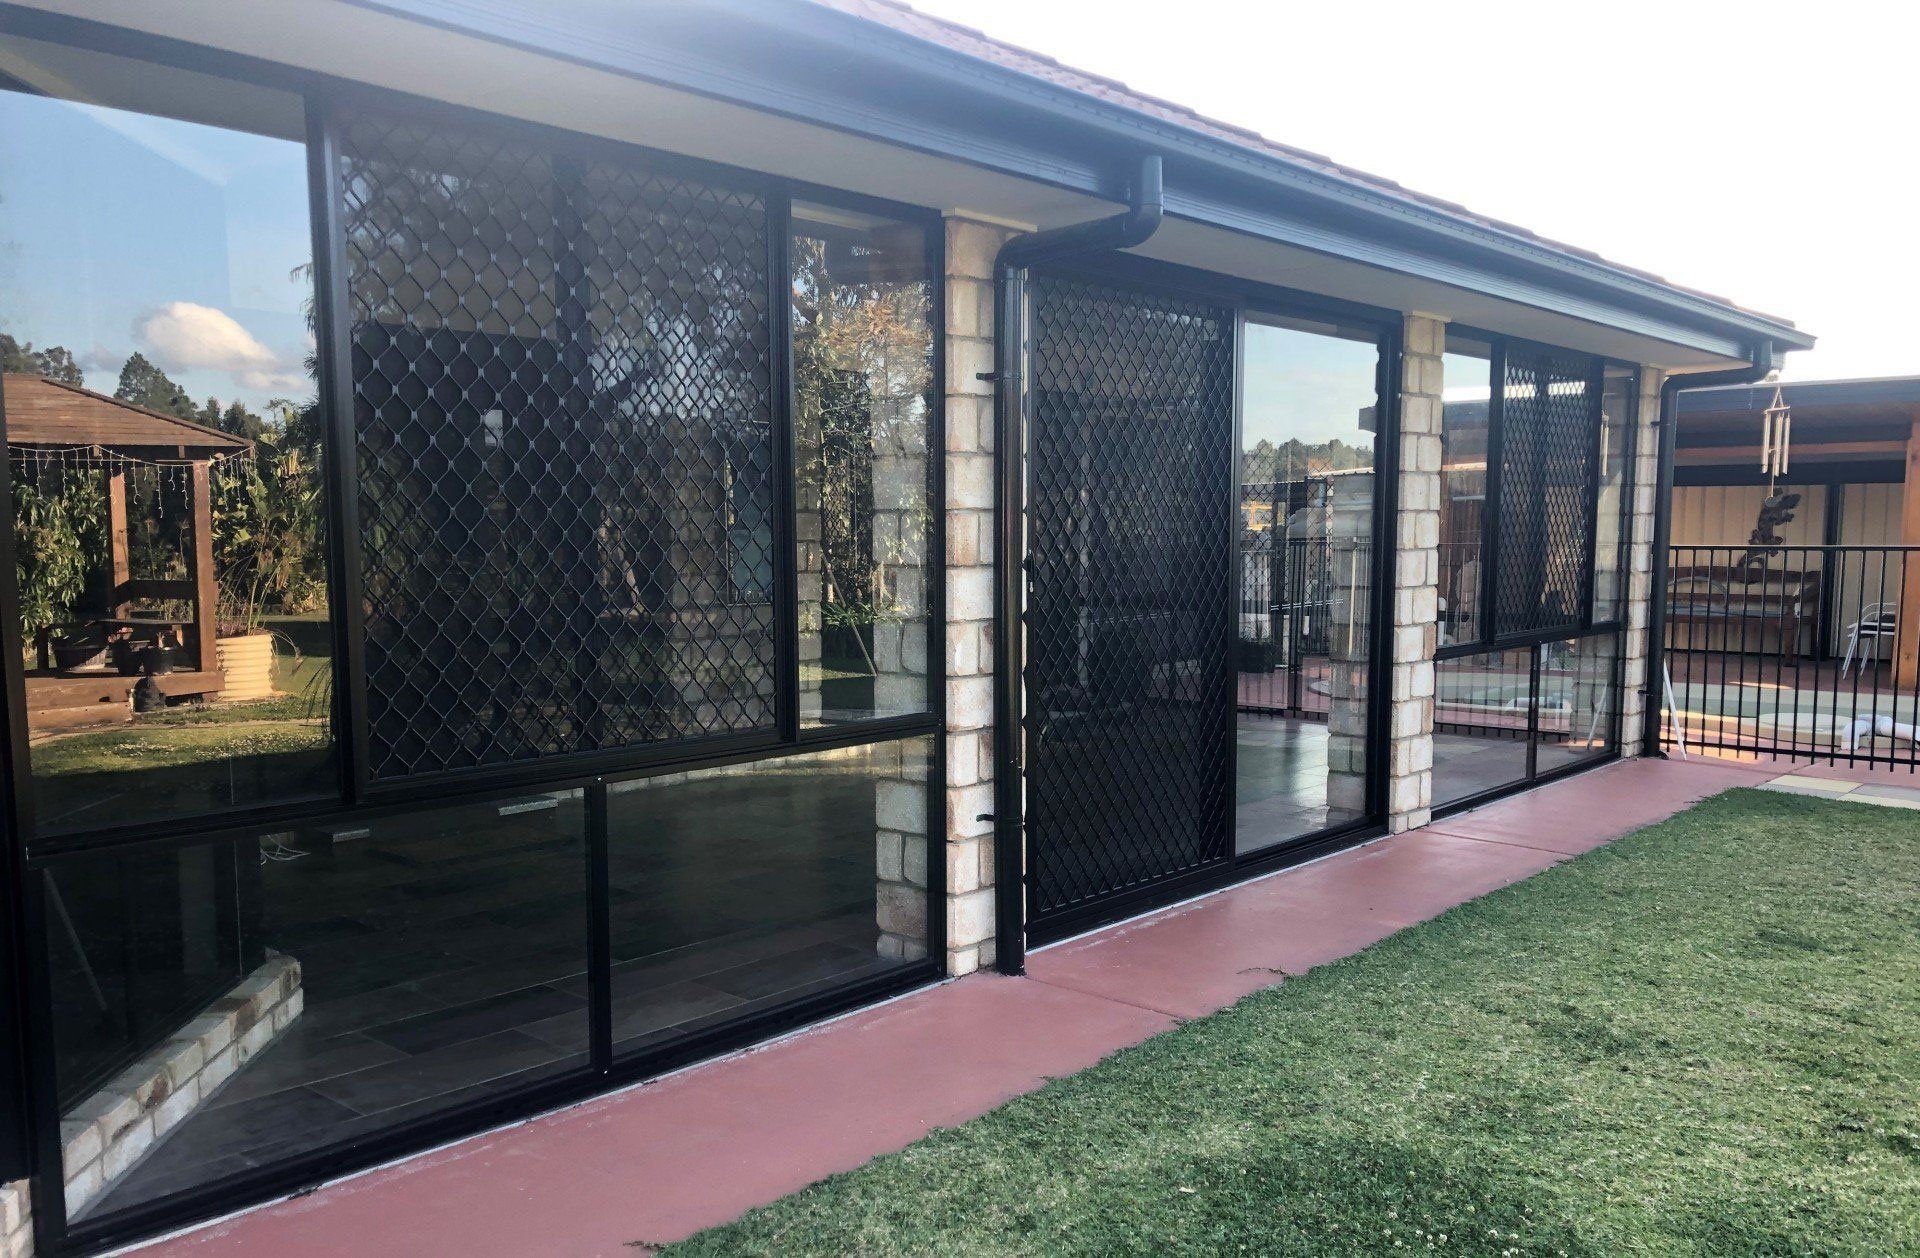 An image of black diamond grille security screens on a brick house